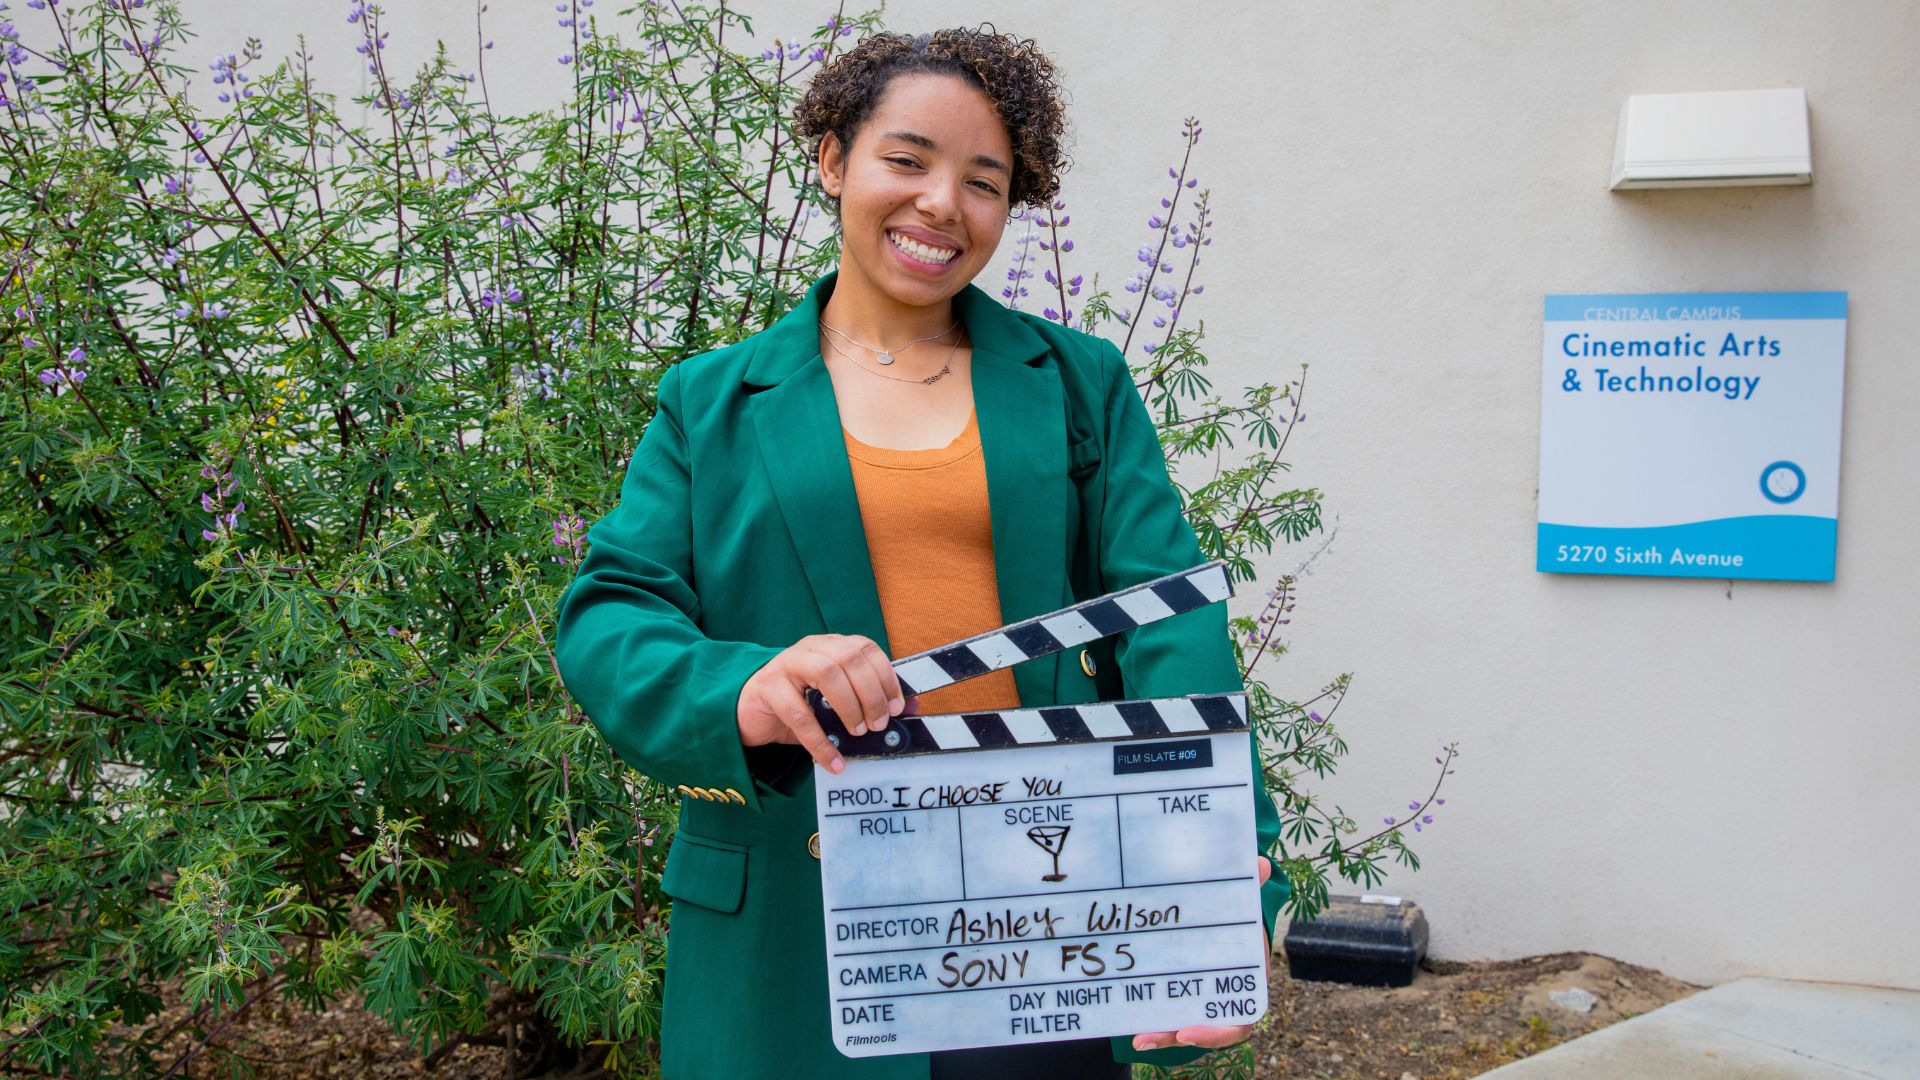 Ashley Wilson with film clapboard promoting her capstone film